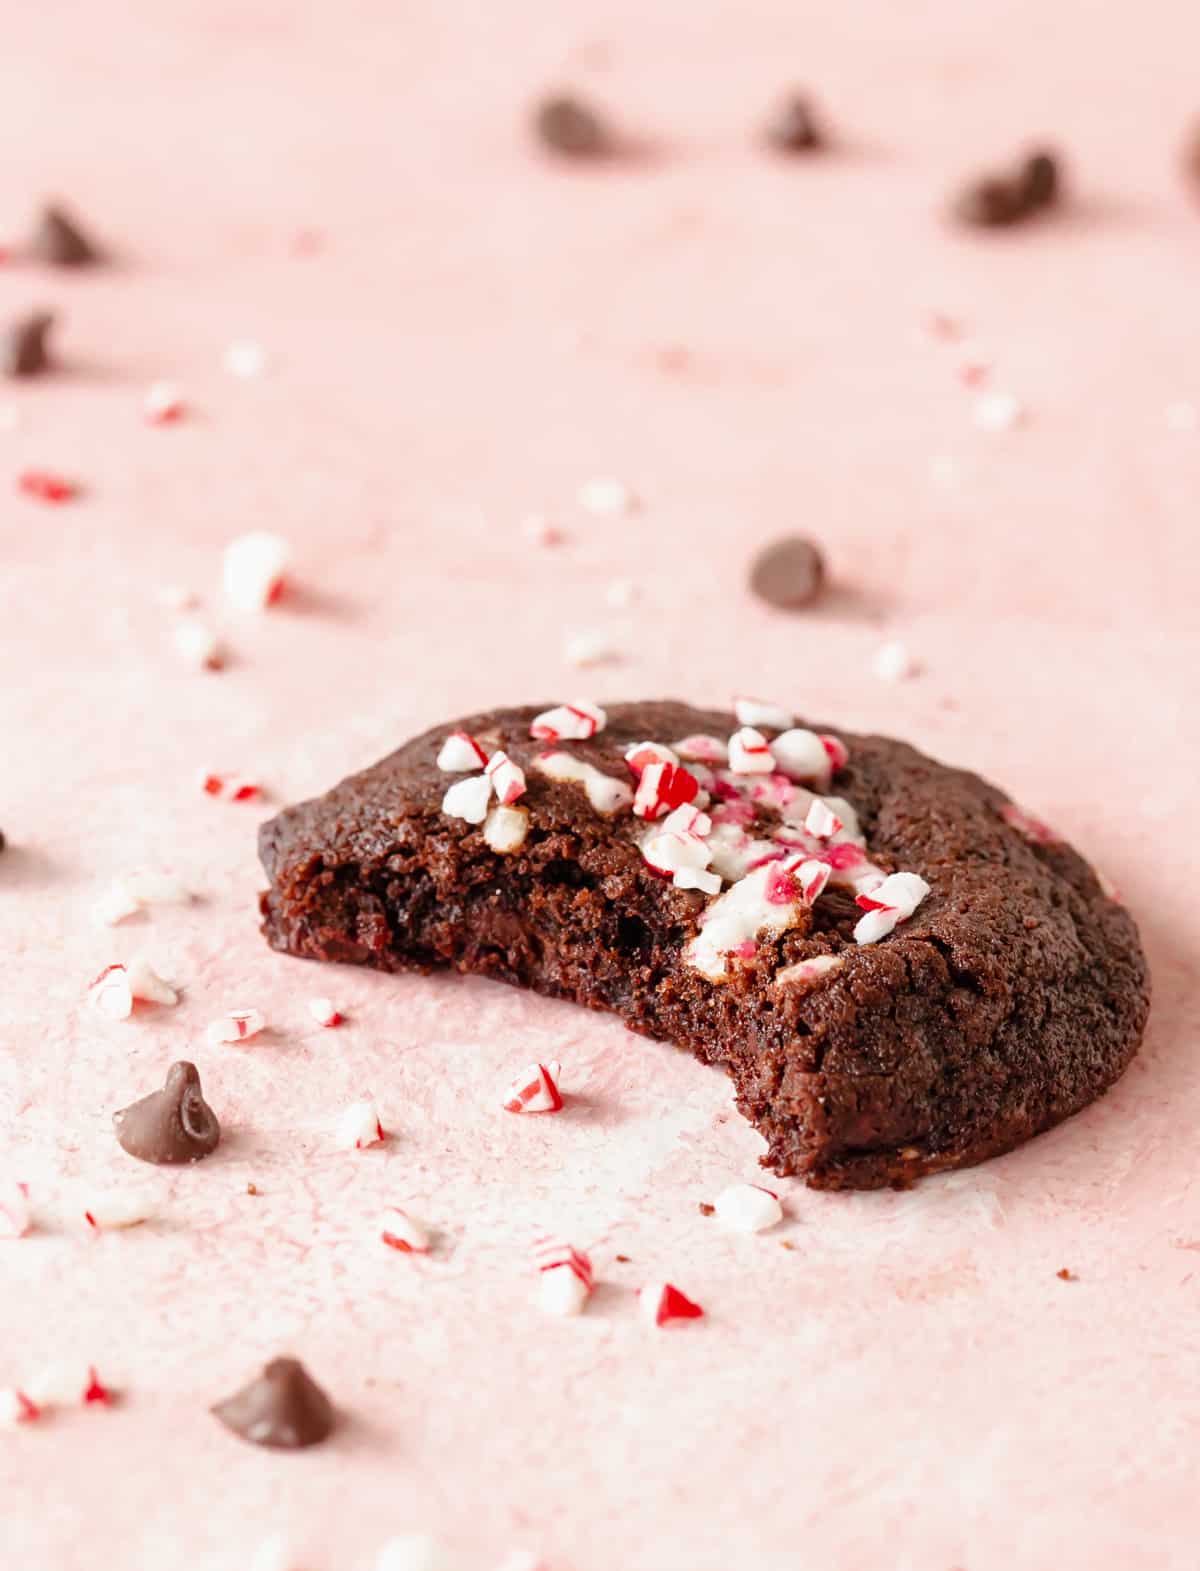 Single bitten peppermint chocolate cookie on pink surface with chips and crushed candy around. 